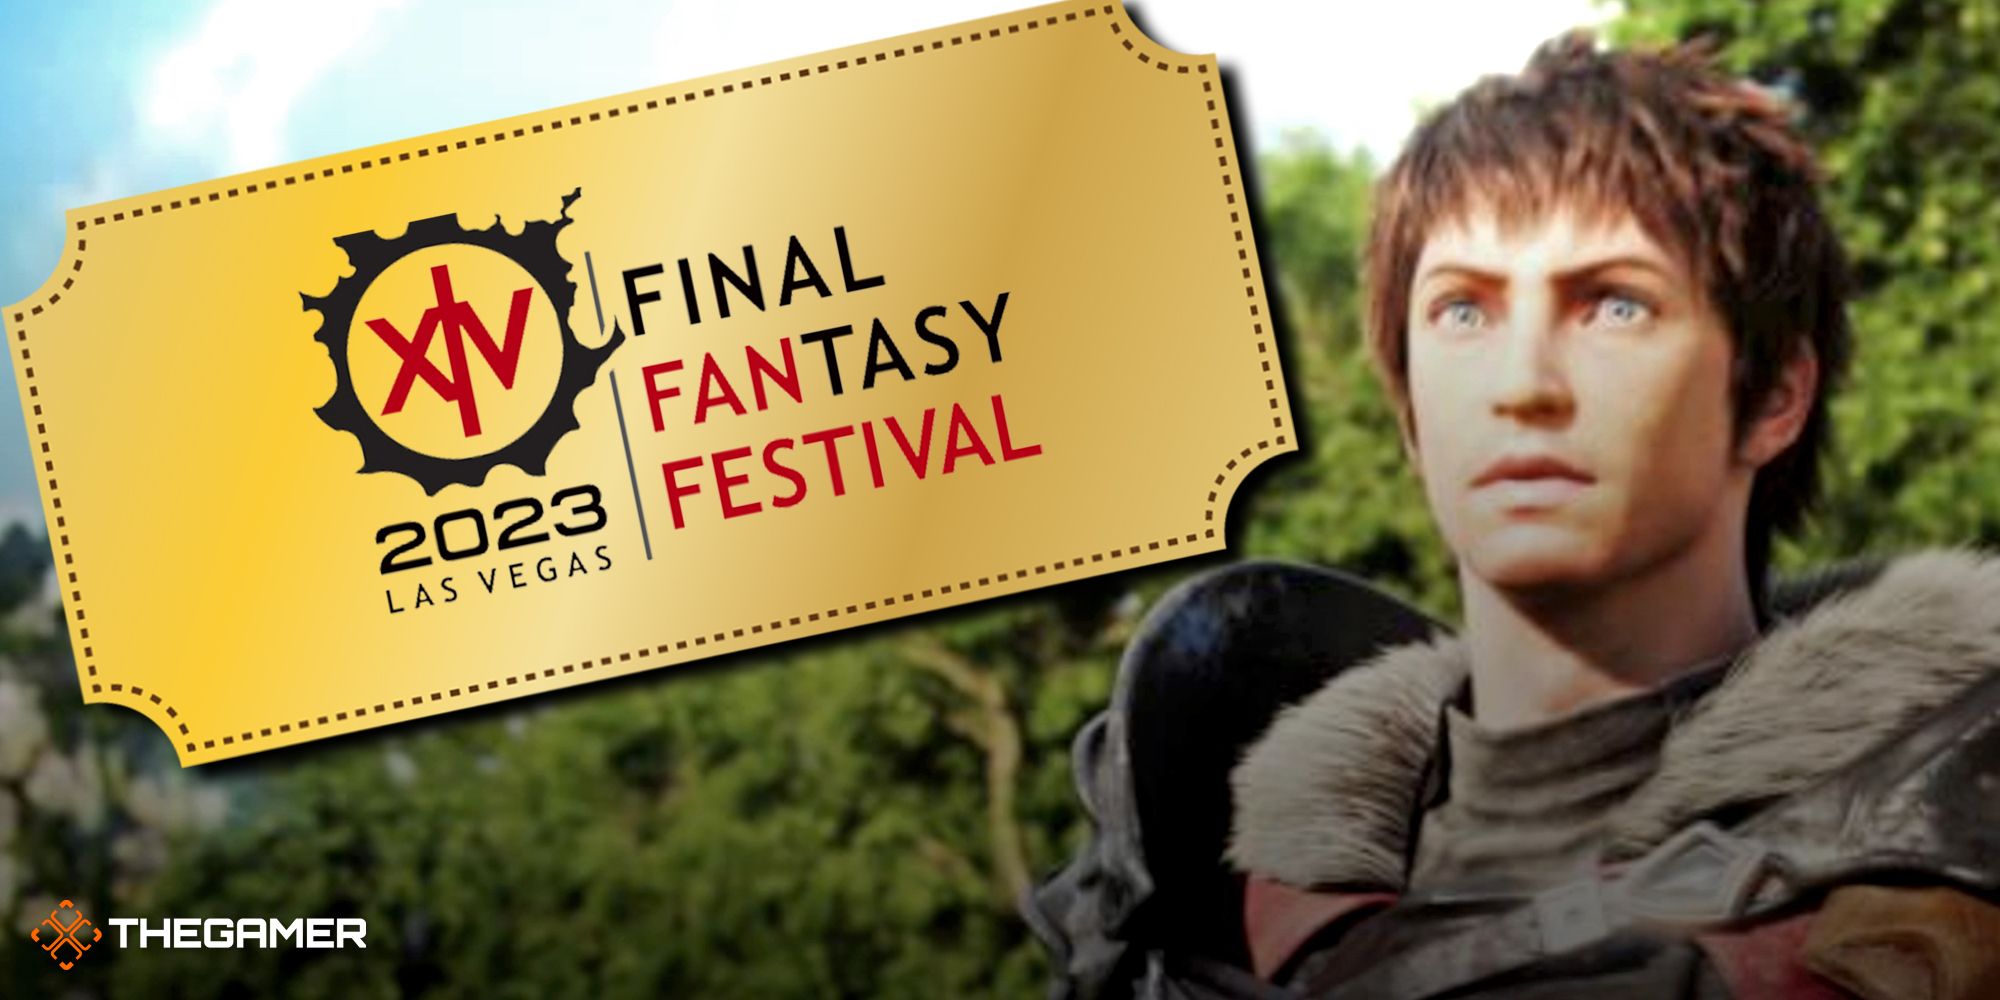 Final Fantasy 14 Fan Fest Ticket Codes Are Being Scalped For Over ,000